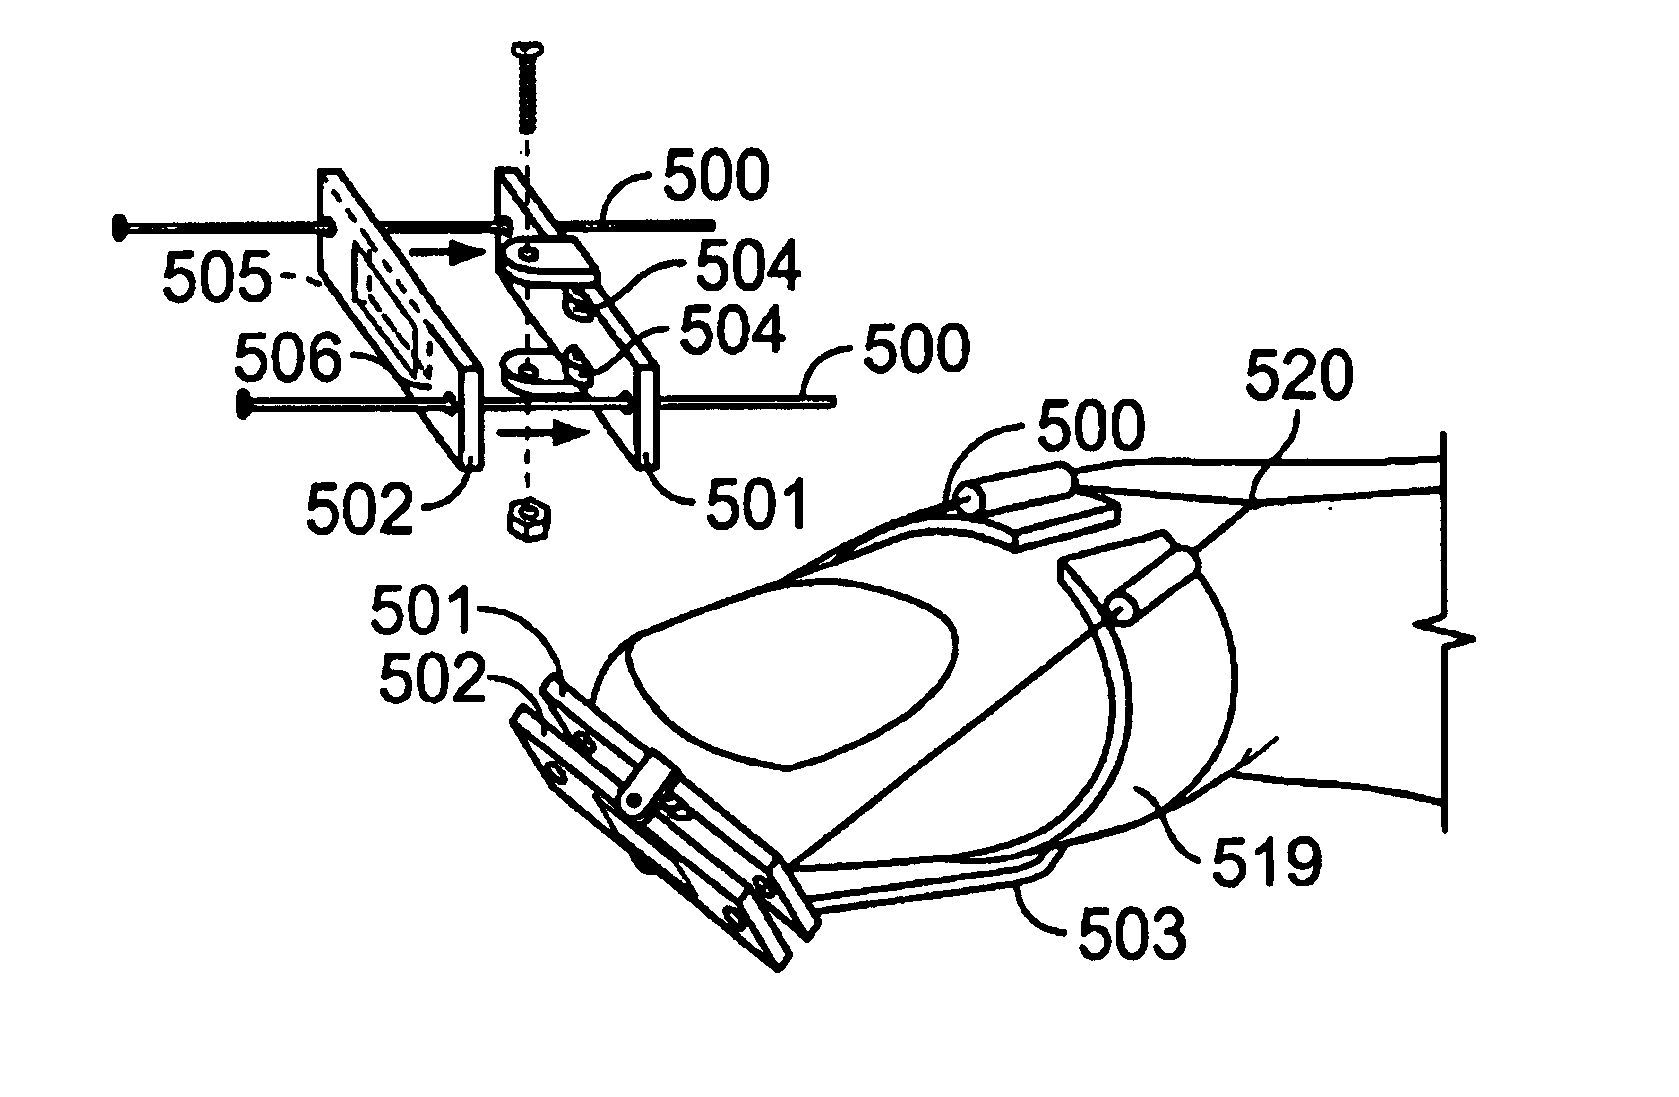 Force feedback and texture simulating interface device